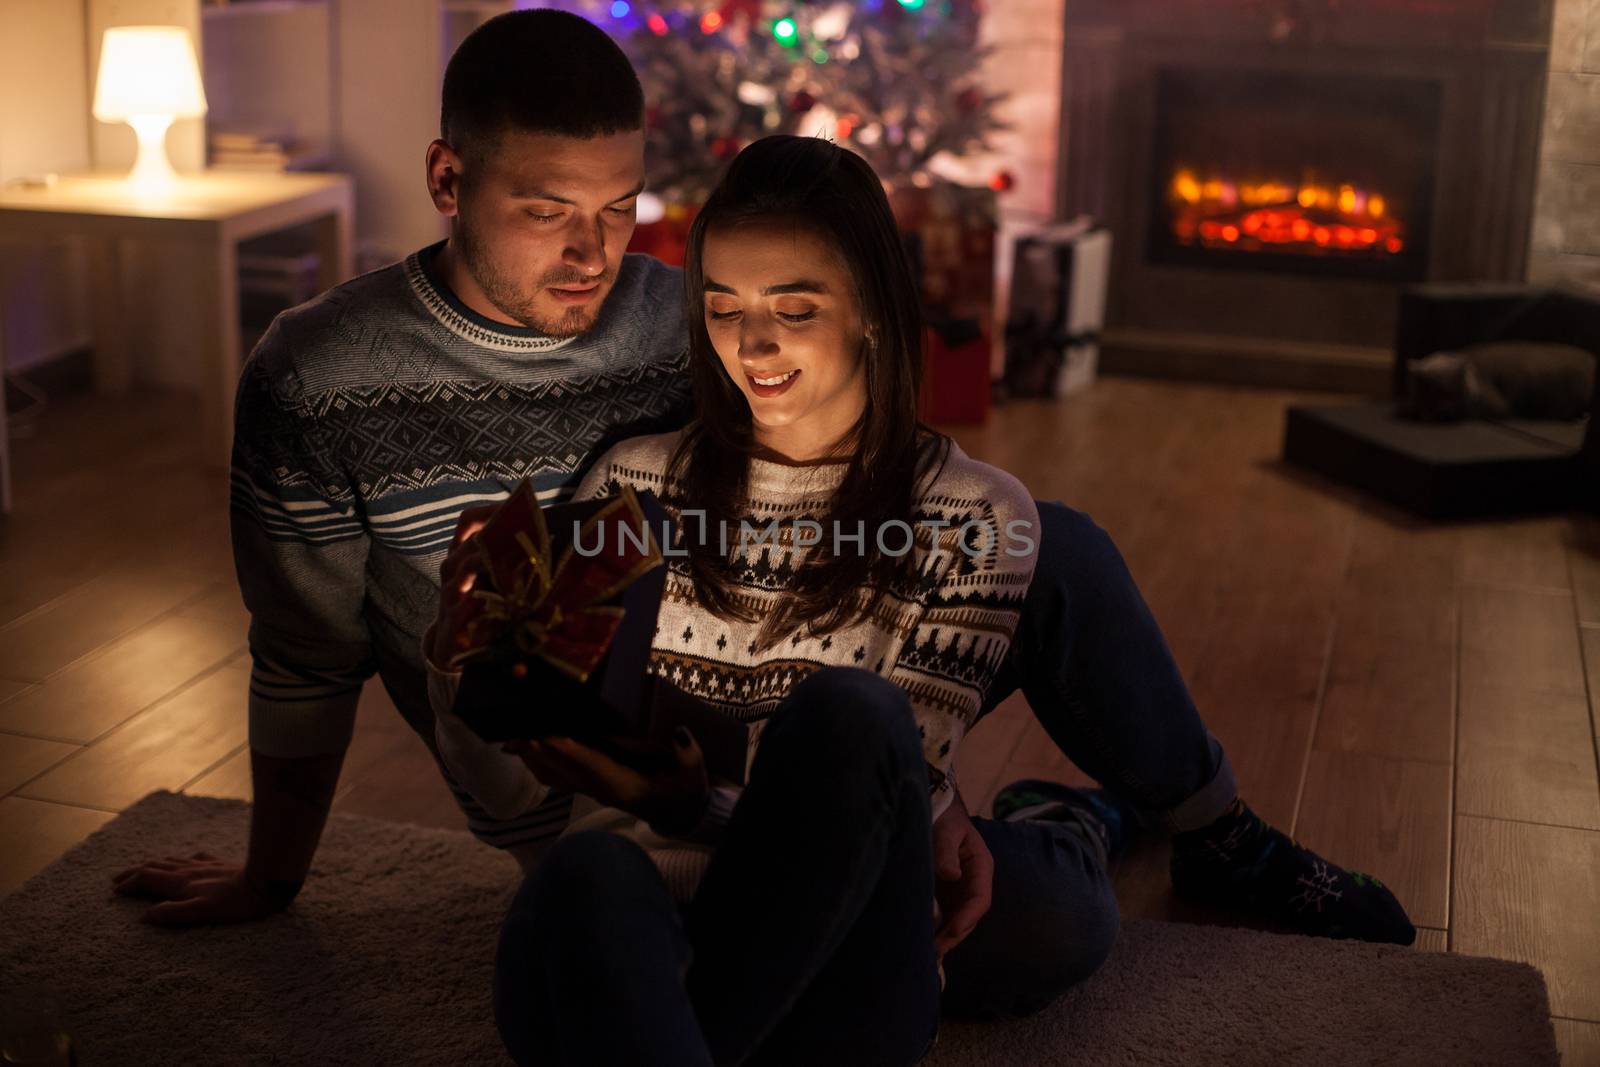 Cheerful couple in a dark room excited about about magic christmas gift.